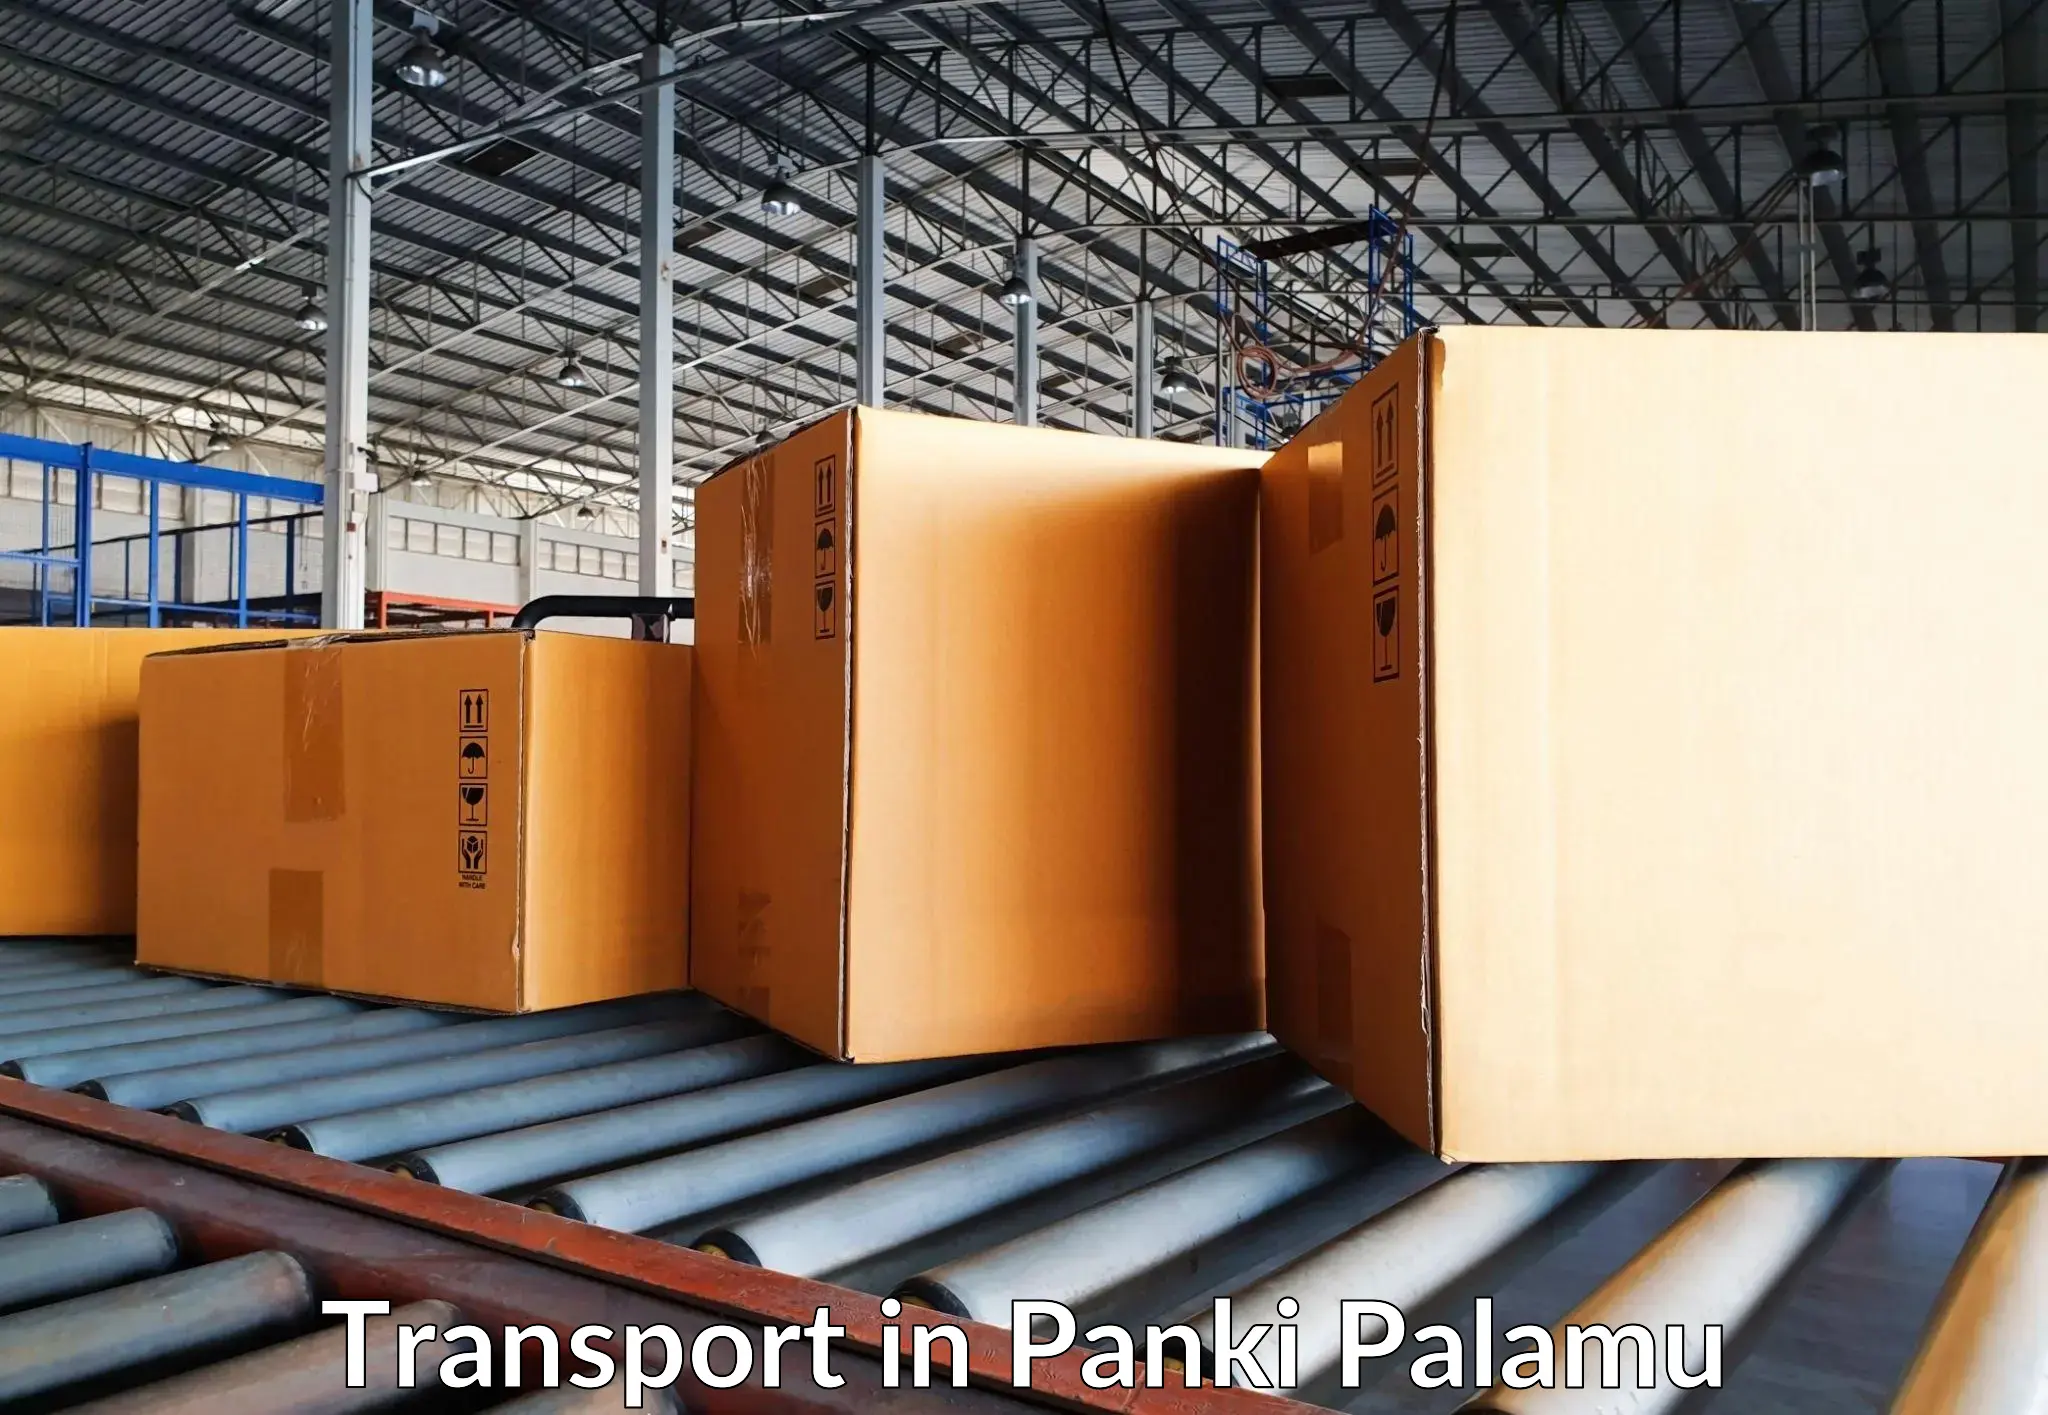 Container transportation services in Panki Palamu